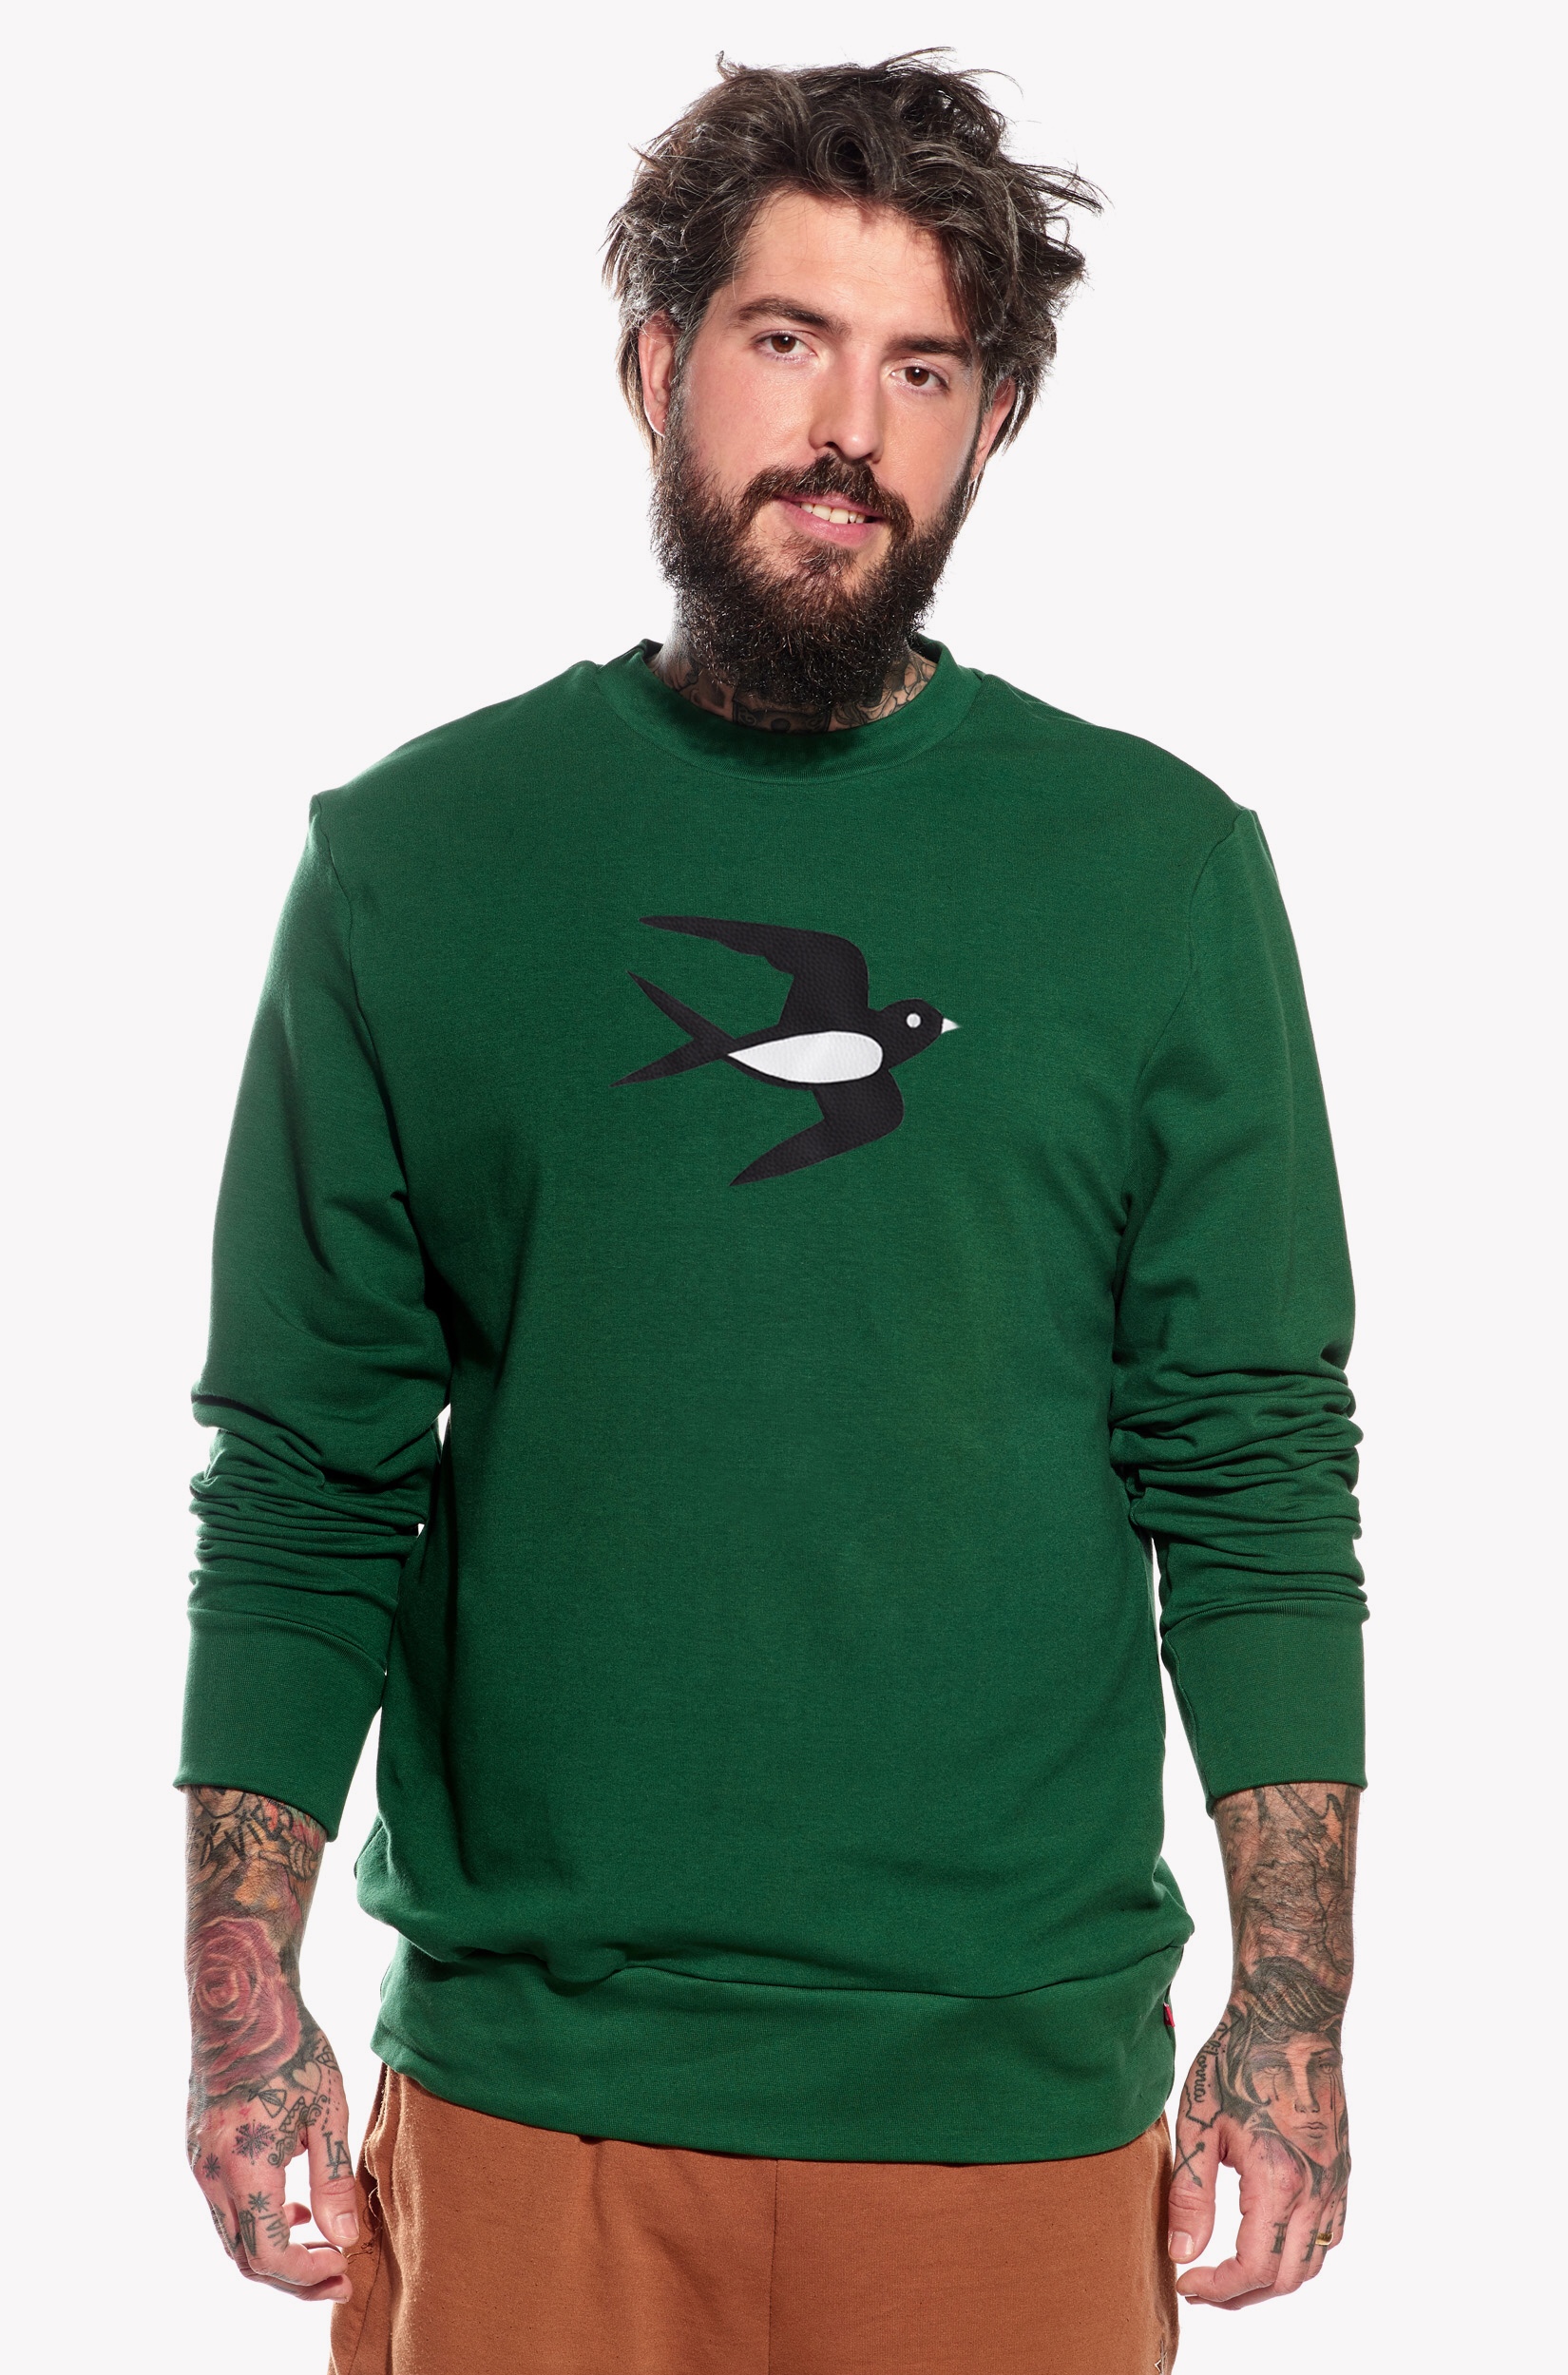 Hoodie with swallow